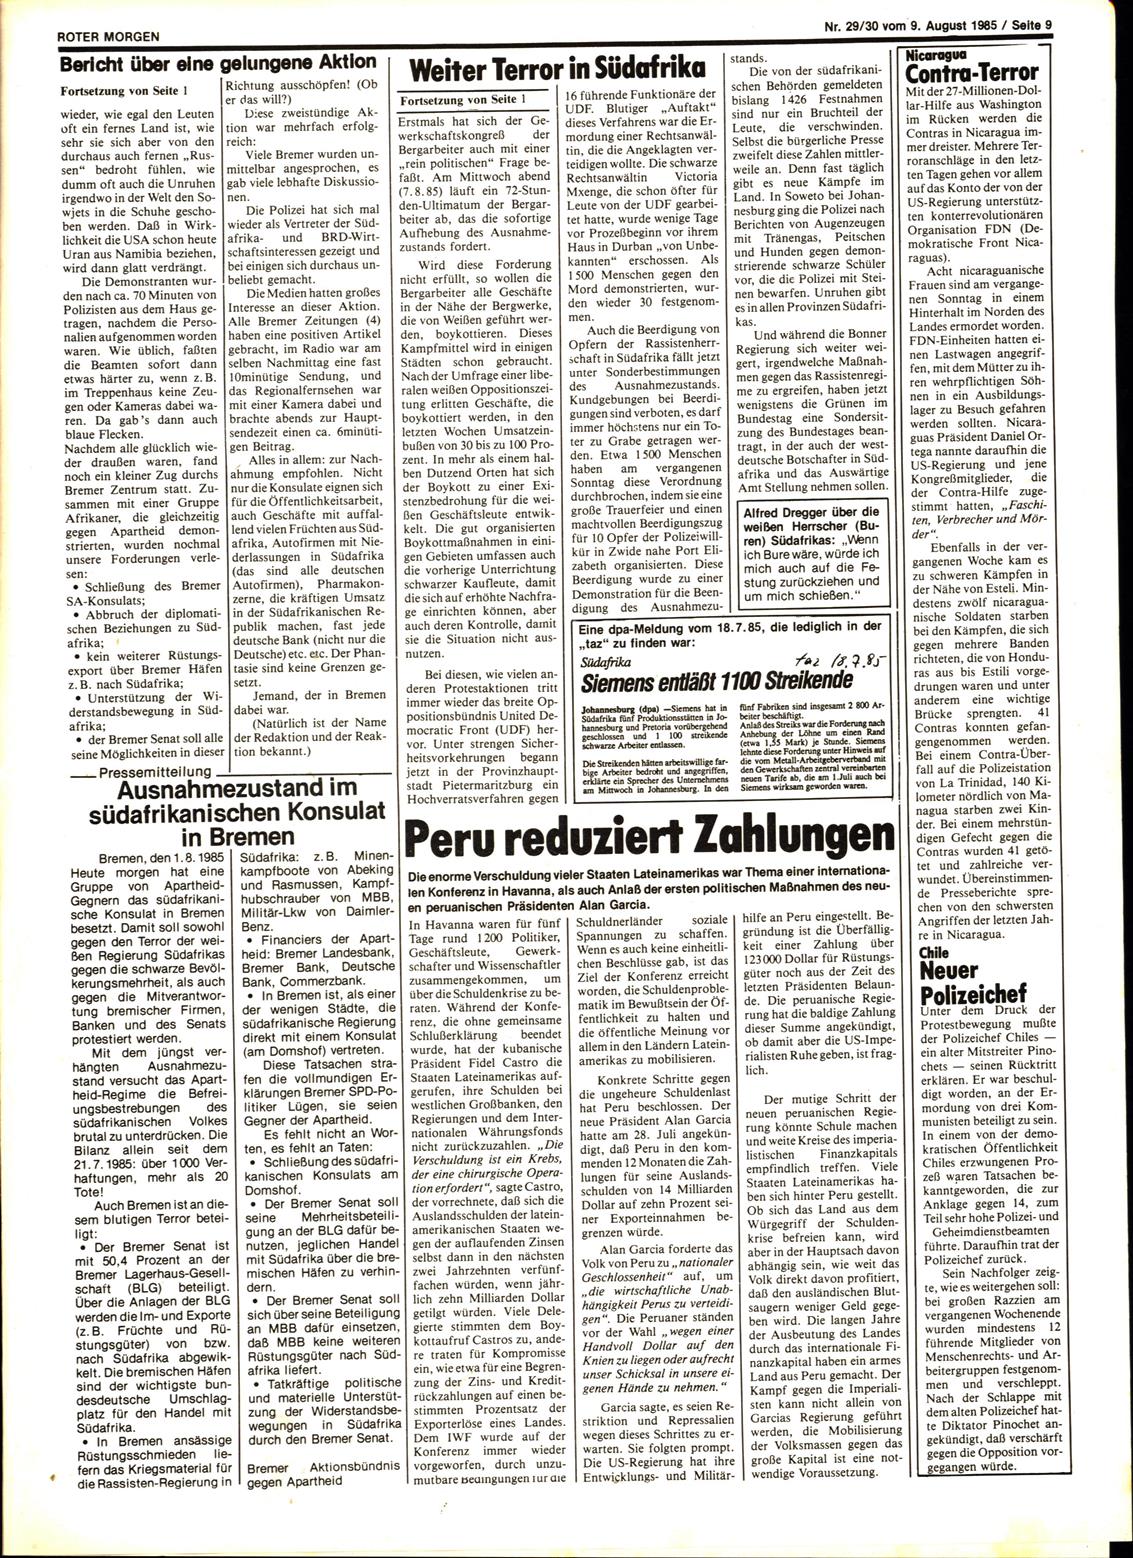 Roter Morgen, 19. Jg., 9. August 1985, Nr. 29/30, Seite 9